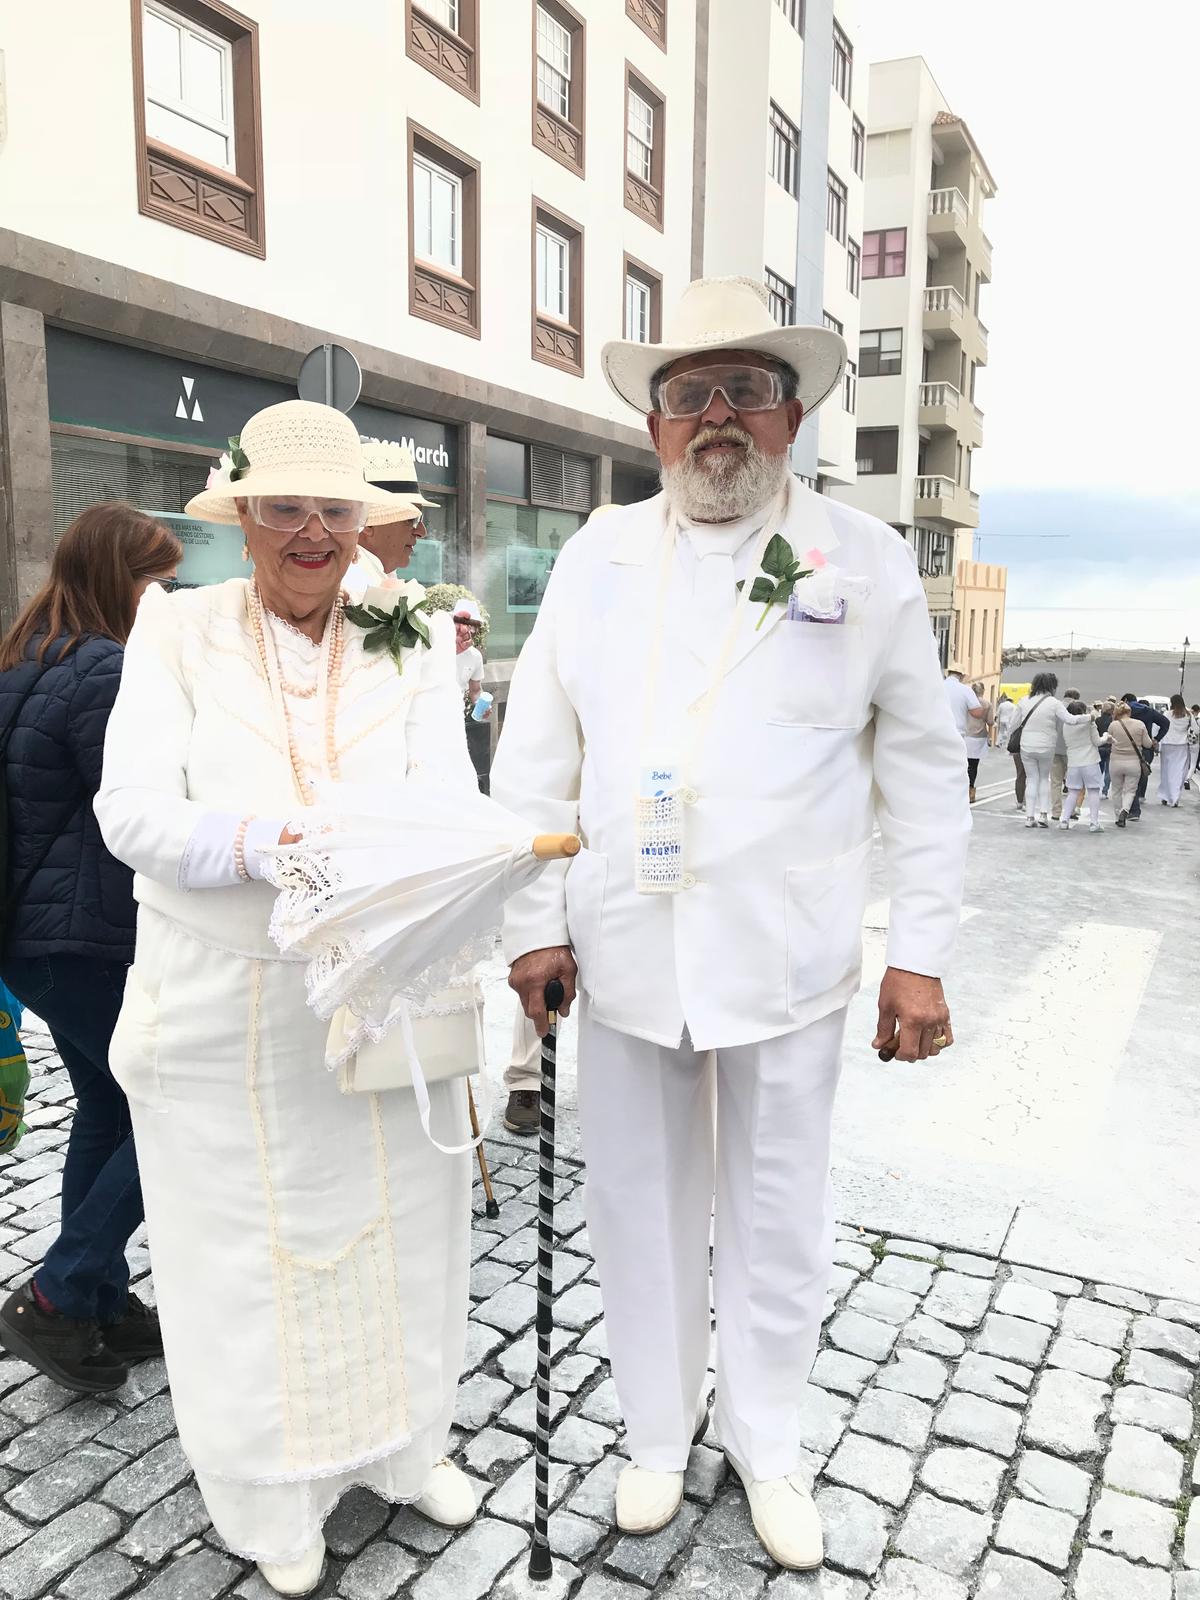 A couple dressed in white, as is customary, at the Fiesta de los Indianos. (Xenia Taliotis)